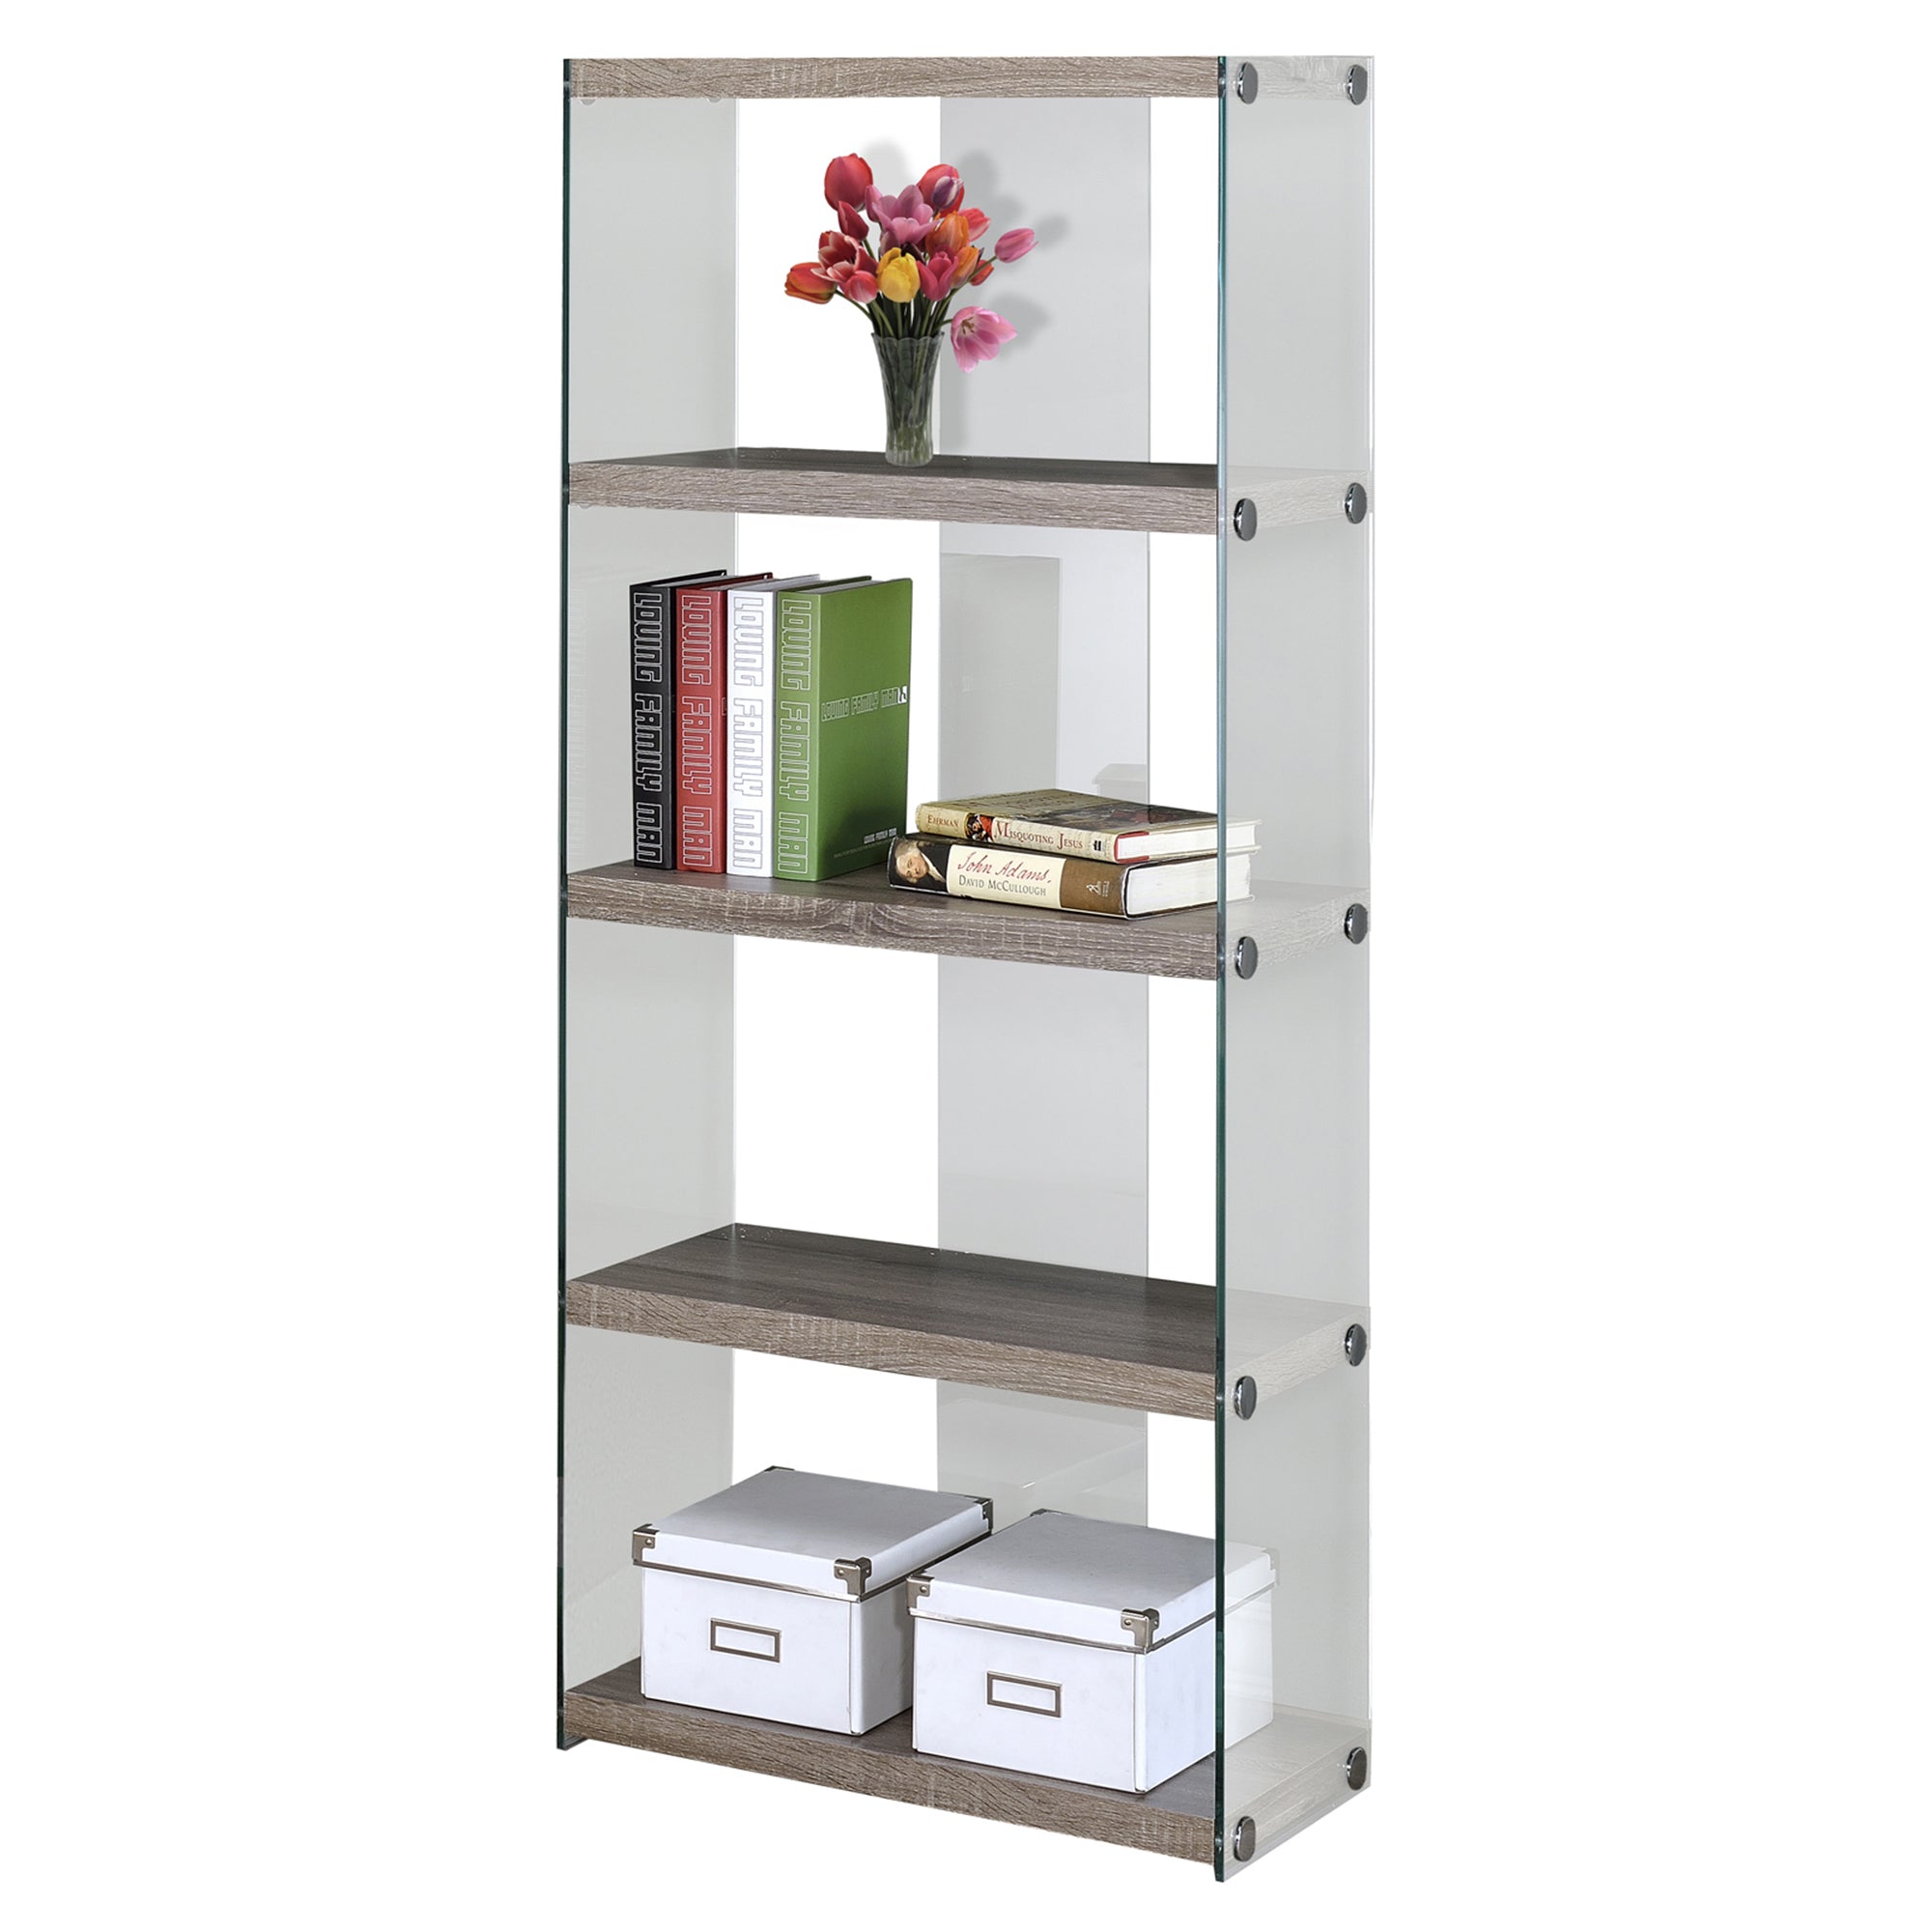 MN-993060    Bookshelf, Bookcase, Etagere, 5 Tier, Office, Bedroom, 60"H, Tempered Glass, Laminate, Dark Taupe, Clear, Contemporary, Modern